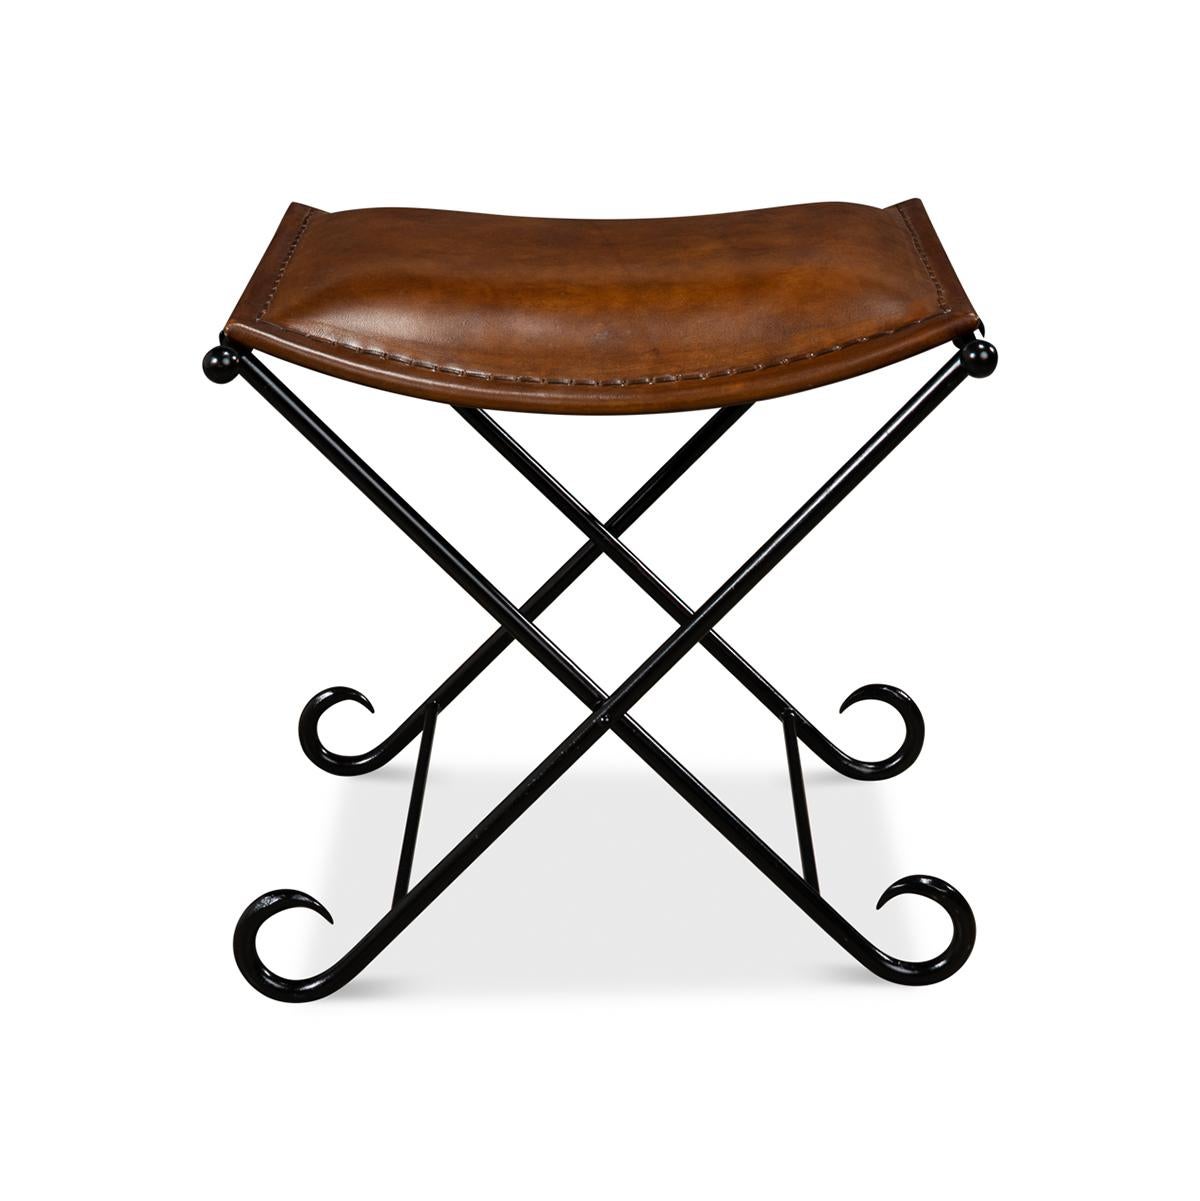 An arabesque influenced style black coated iron base and a leather slung stitched saddle seat cushion.

Dimensions: 20